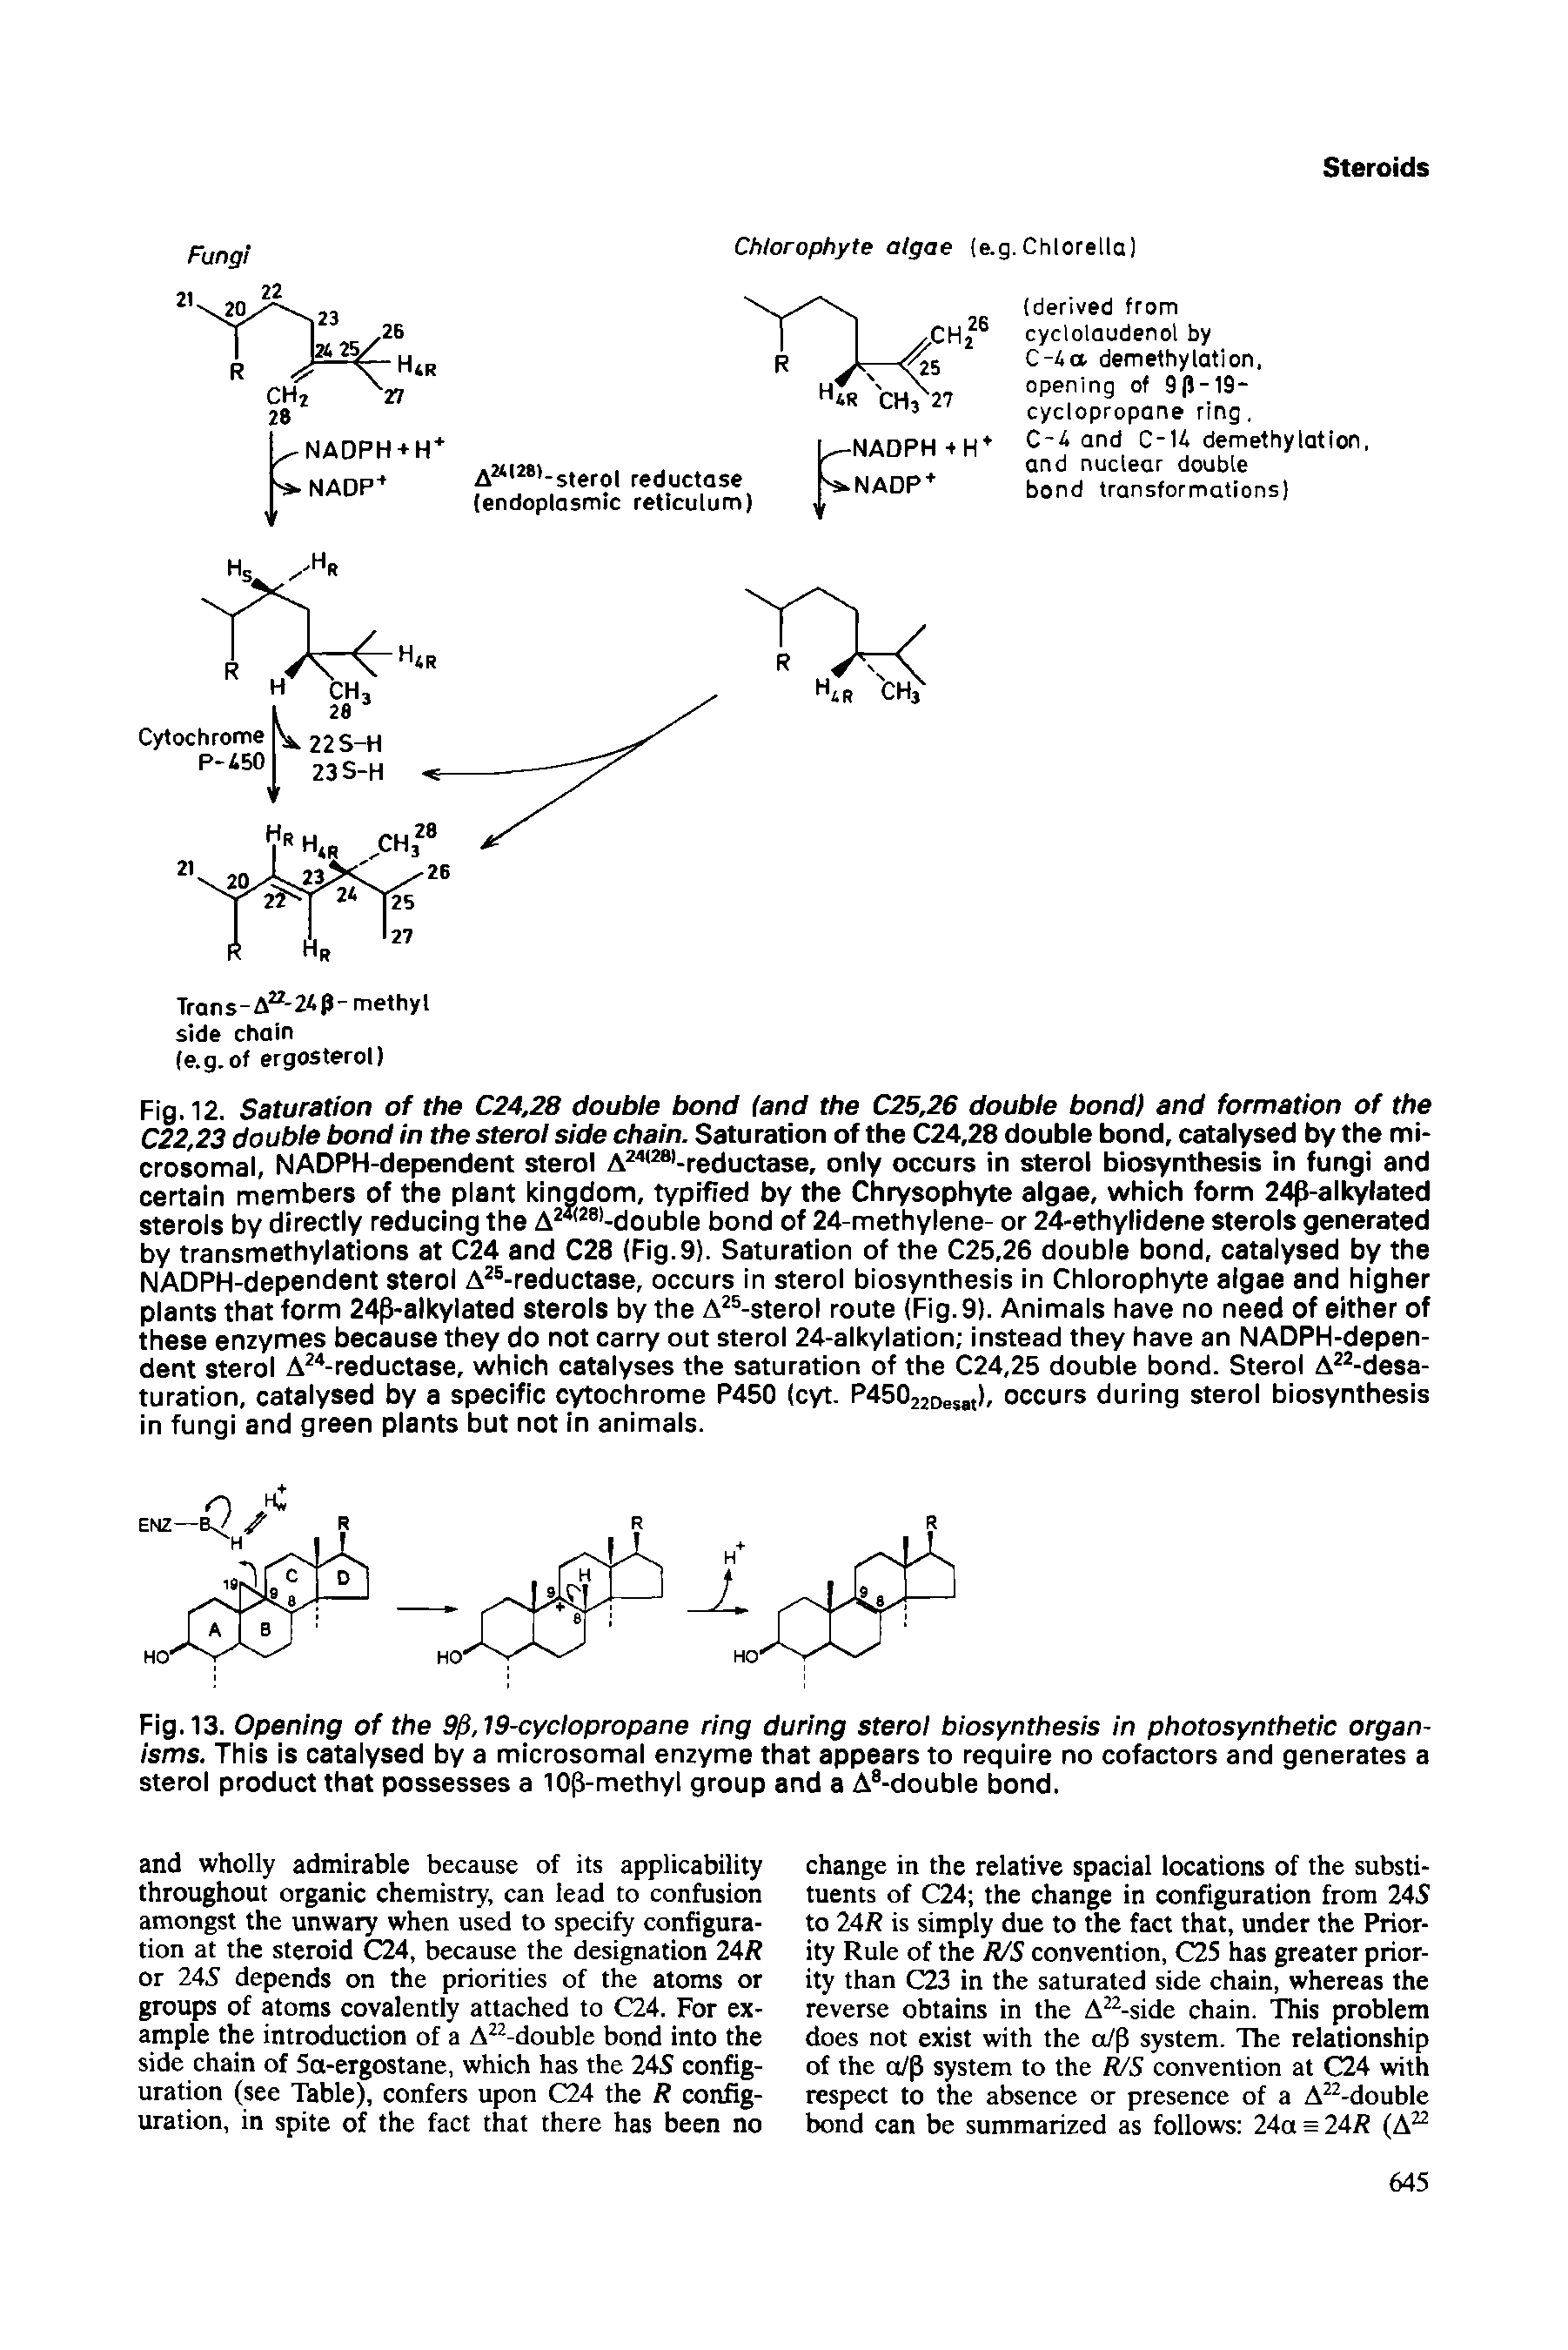 Fig. 13. Opening of the 19-cyclopropane ring during sterol biosynthesis in photosynthetic organisms. This is catalysed by a microsomal enzyme that appears to require no cofactors and generates a sterol product that possesses a lOp-methyl group and a A -double bond.